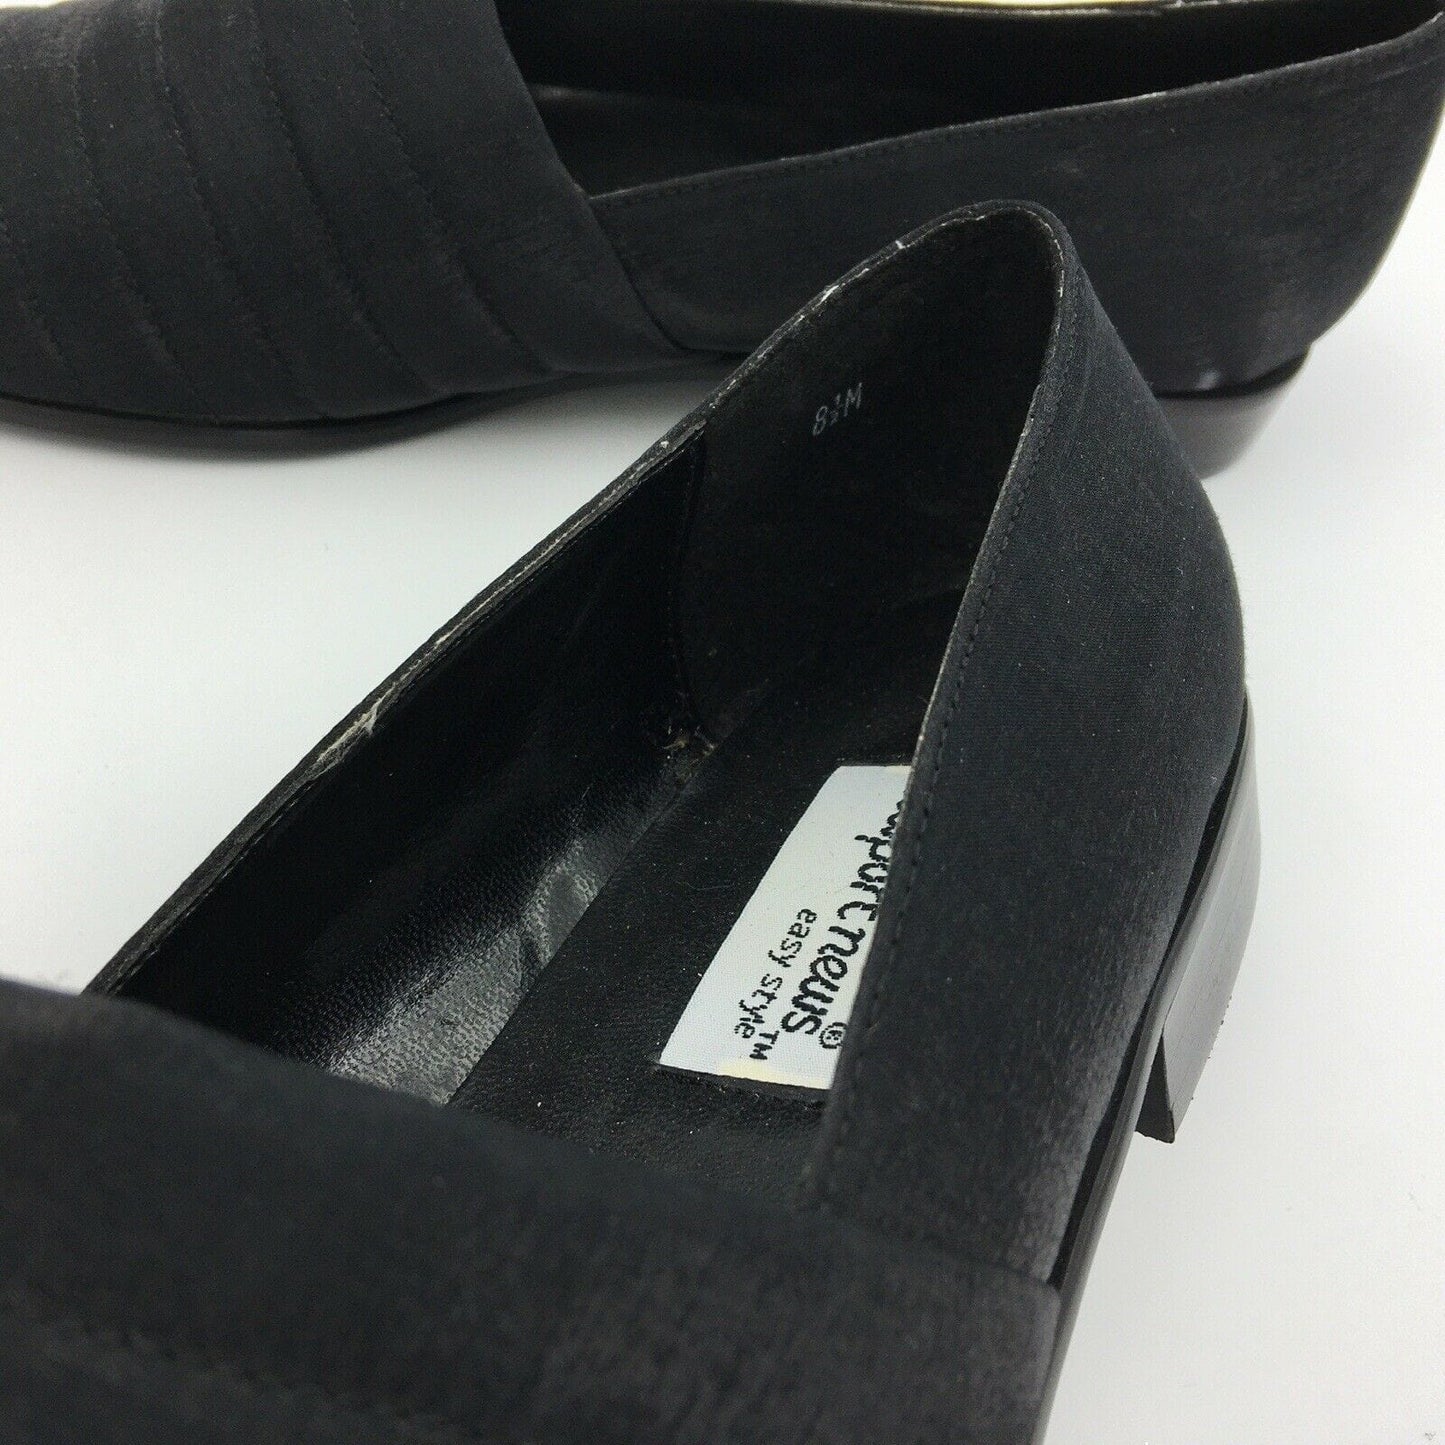 Newport News Womens “Easy Style” Size 8.5M Black Satin Slip-On Flats Shoes